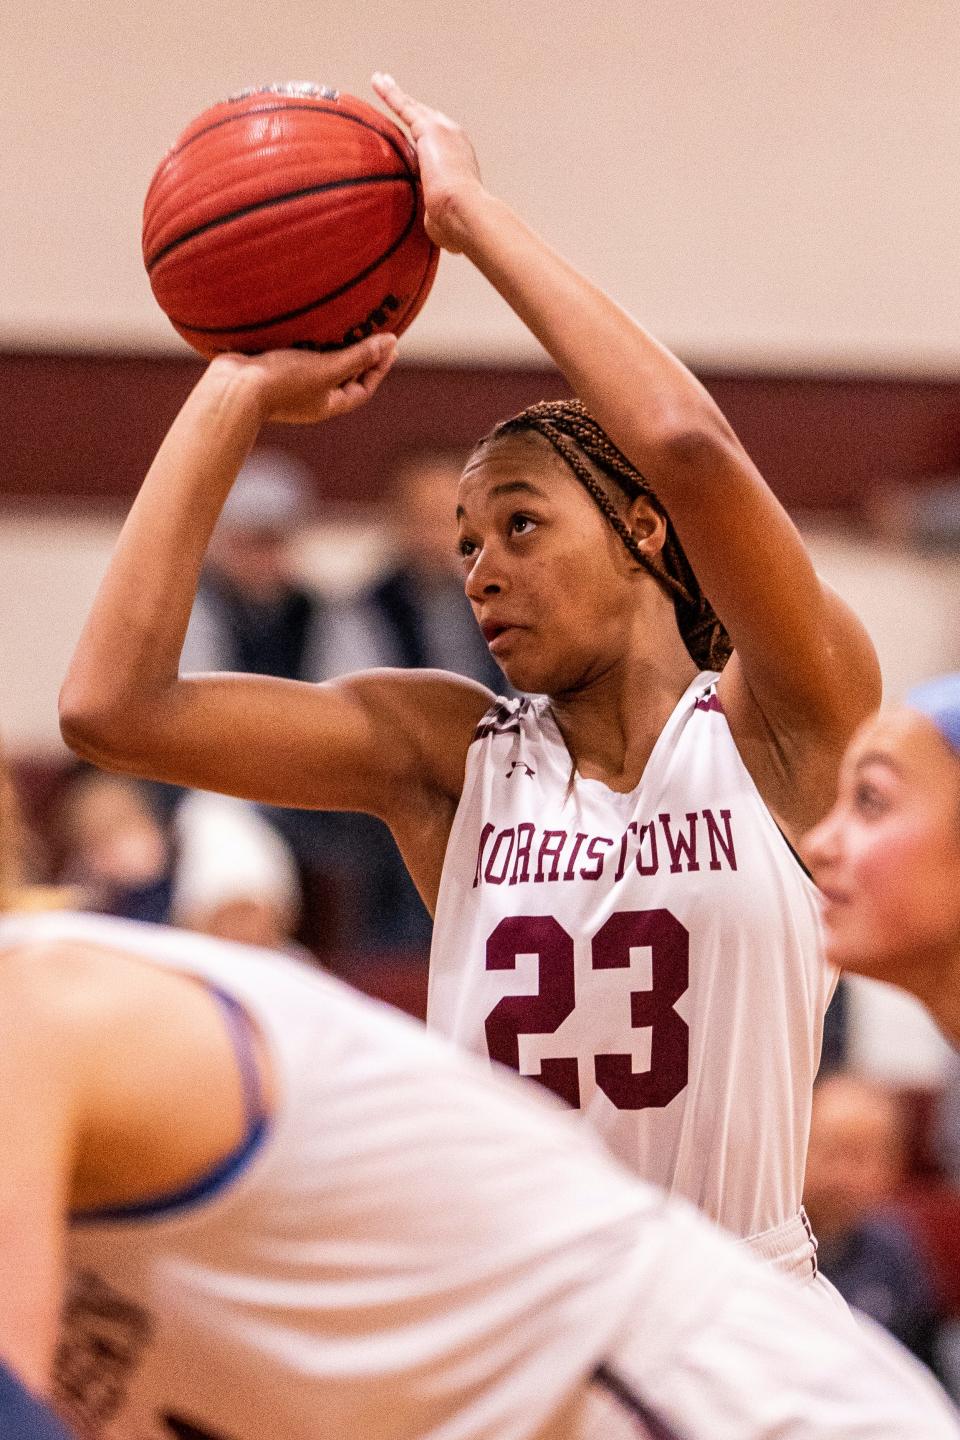 Morristown hosts Jefferson in a girls high school basketball game on Saturday, Dec. 17, 2022. Morrsitown's Maya Summerville (#23) with the ball.